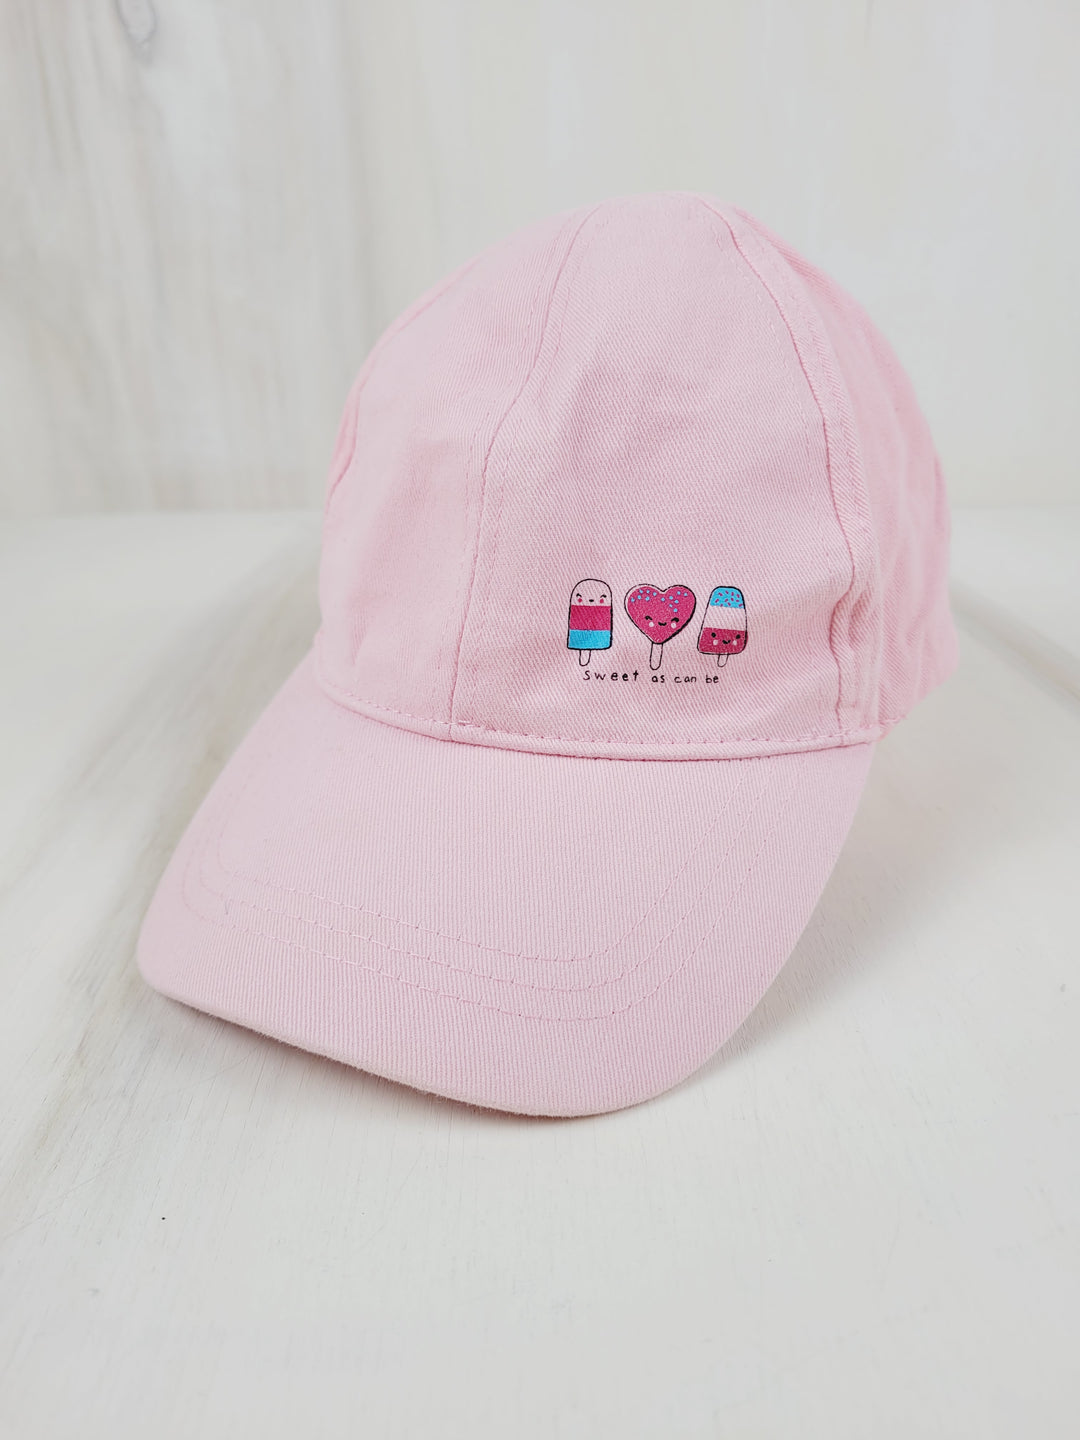 GEORGE SWEET AS CAN BE PINK CAP 2-5Y EUC